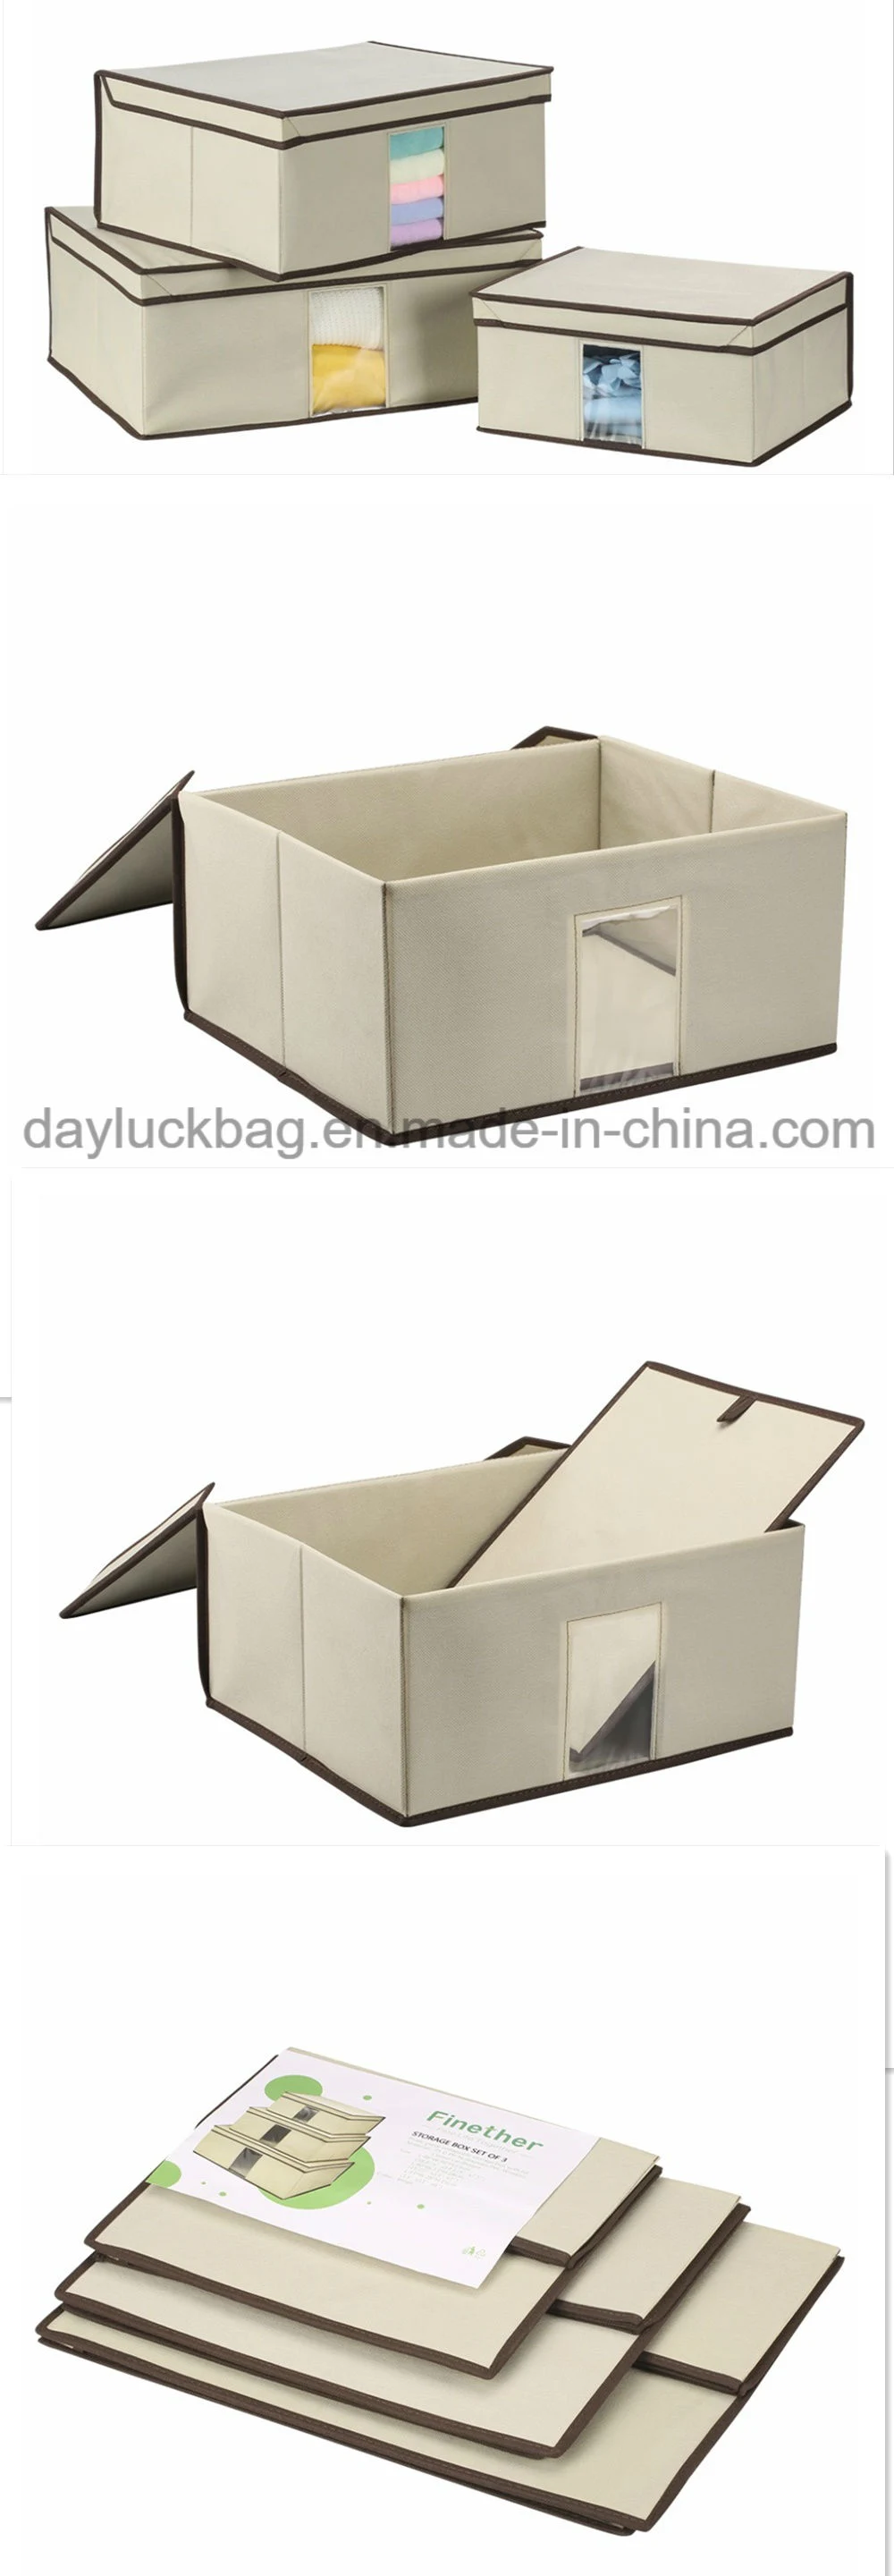 Large Non-Woven Cardboard Fabrics Multipurpose Doll Storage Box with Lid